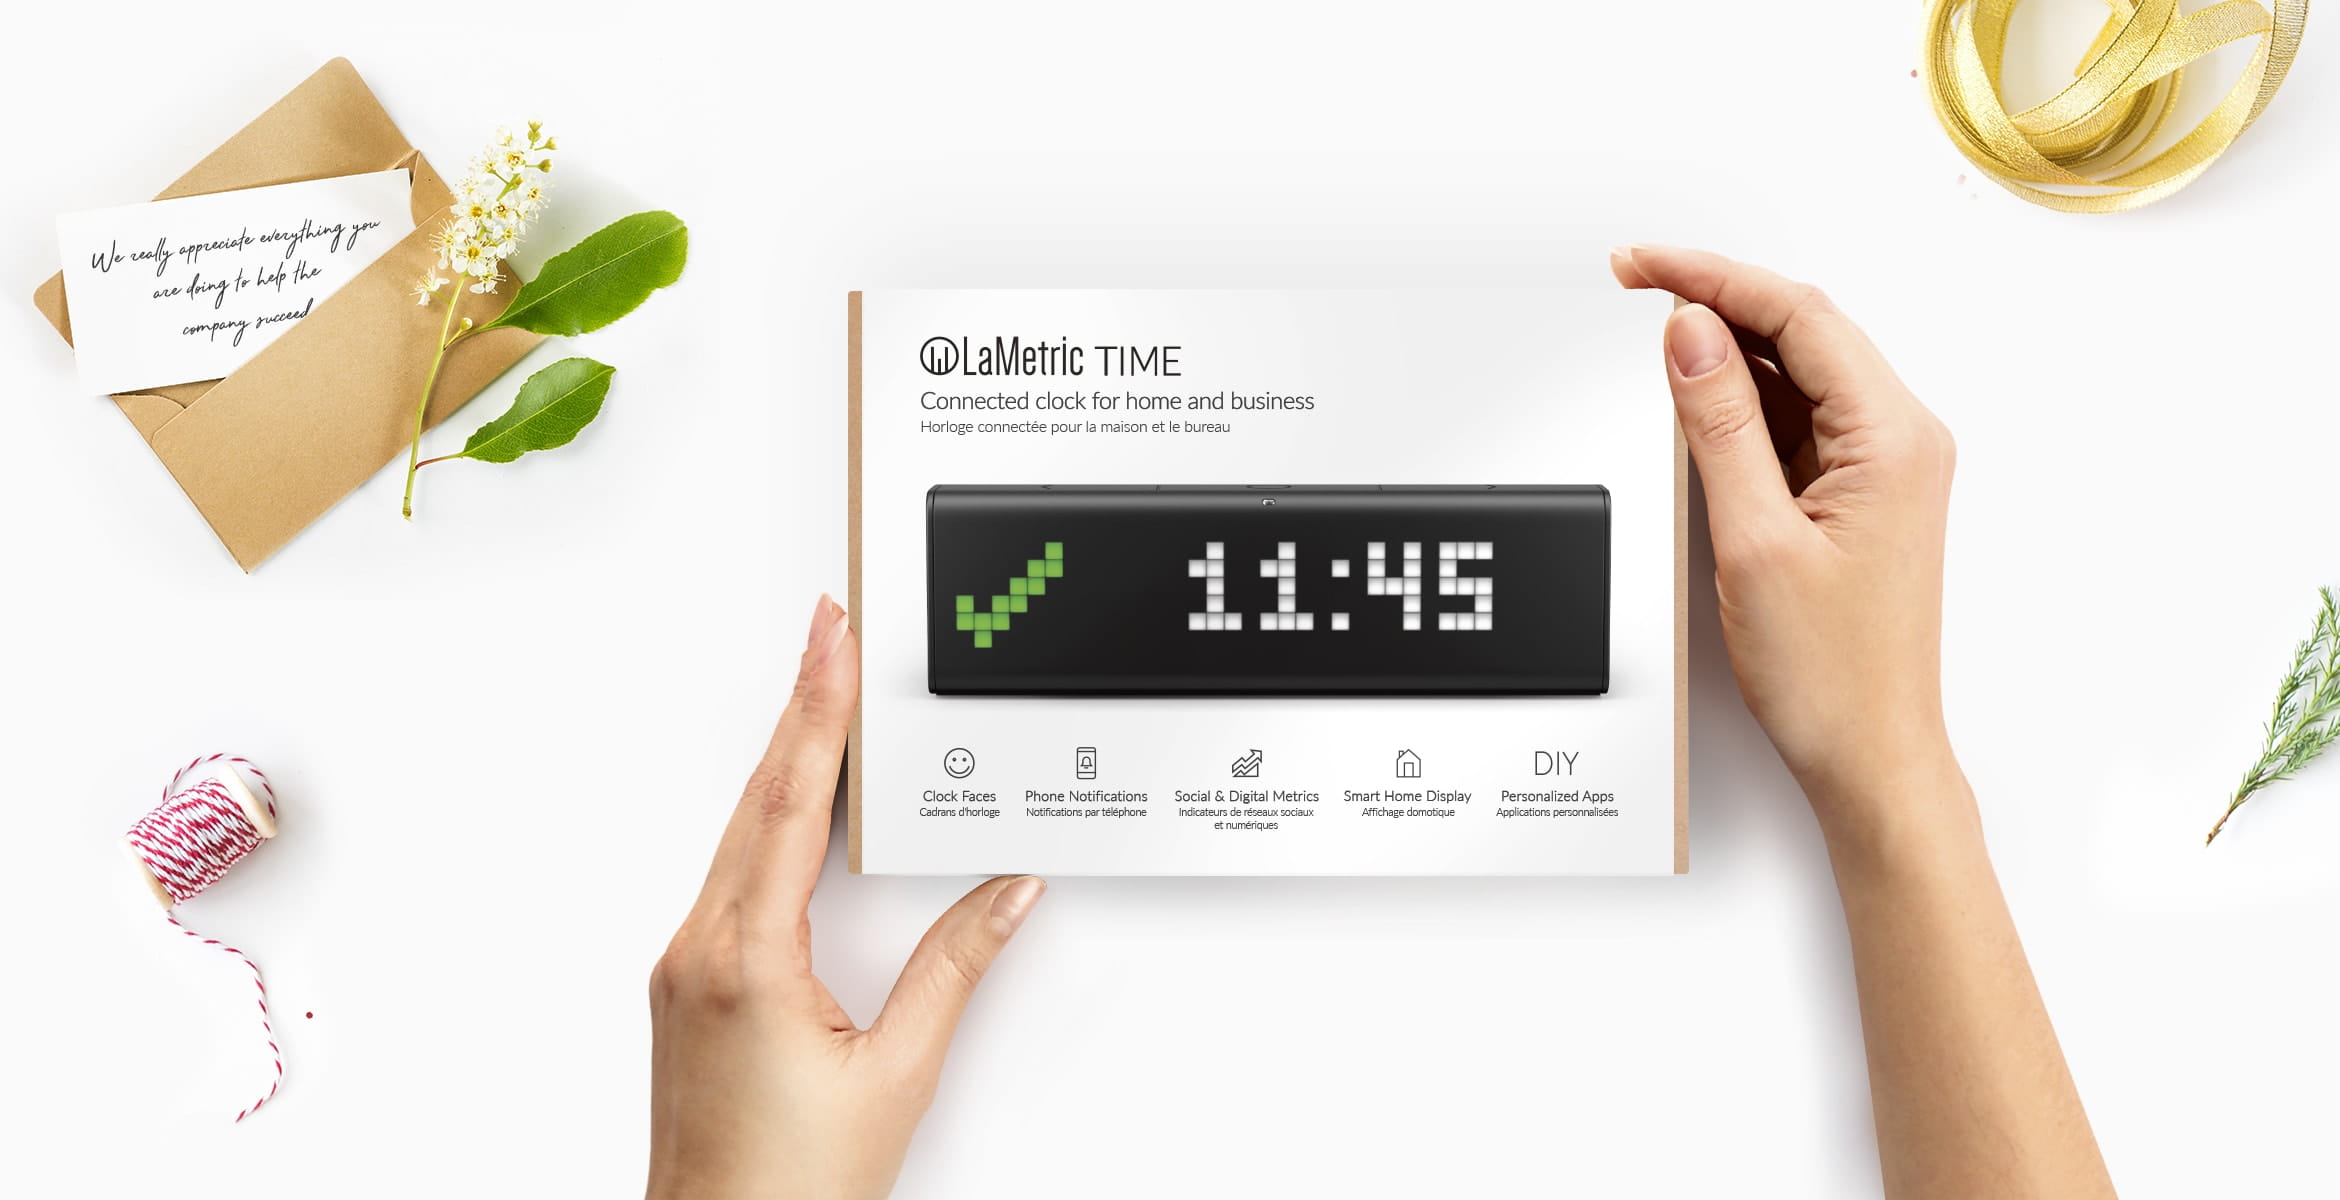 LaMetric Time smart clock for home and business in its' giftbox depicted as a perfect gift for co-workers and employees